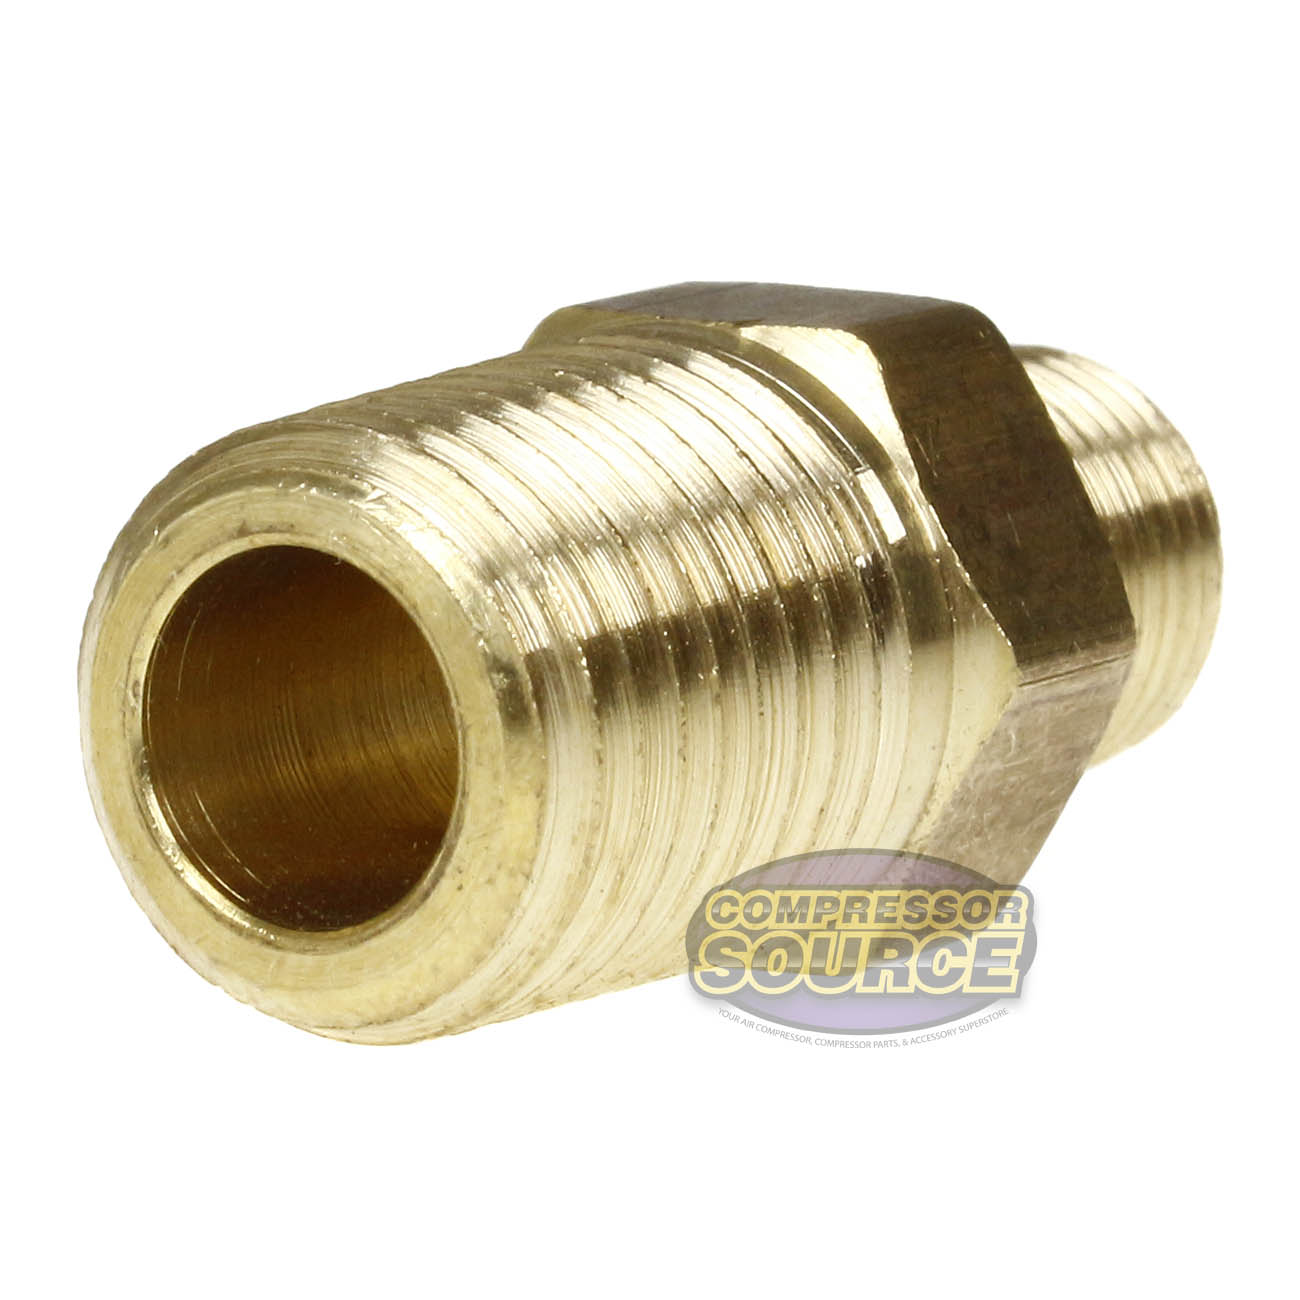 5 Pack 1/4" x 1/8" Male NPTF Pipe Reducing Hex Nipple Solid Brass Pipe Fitting